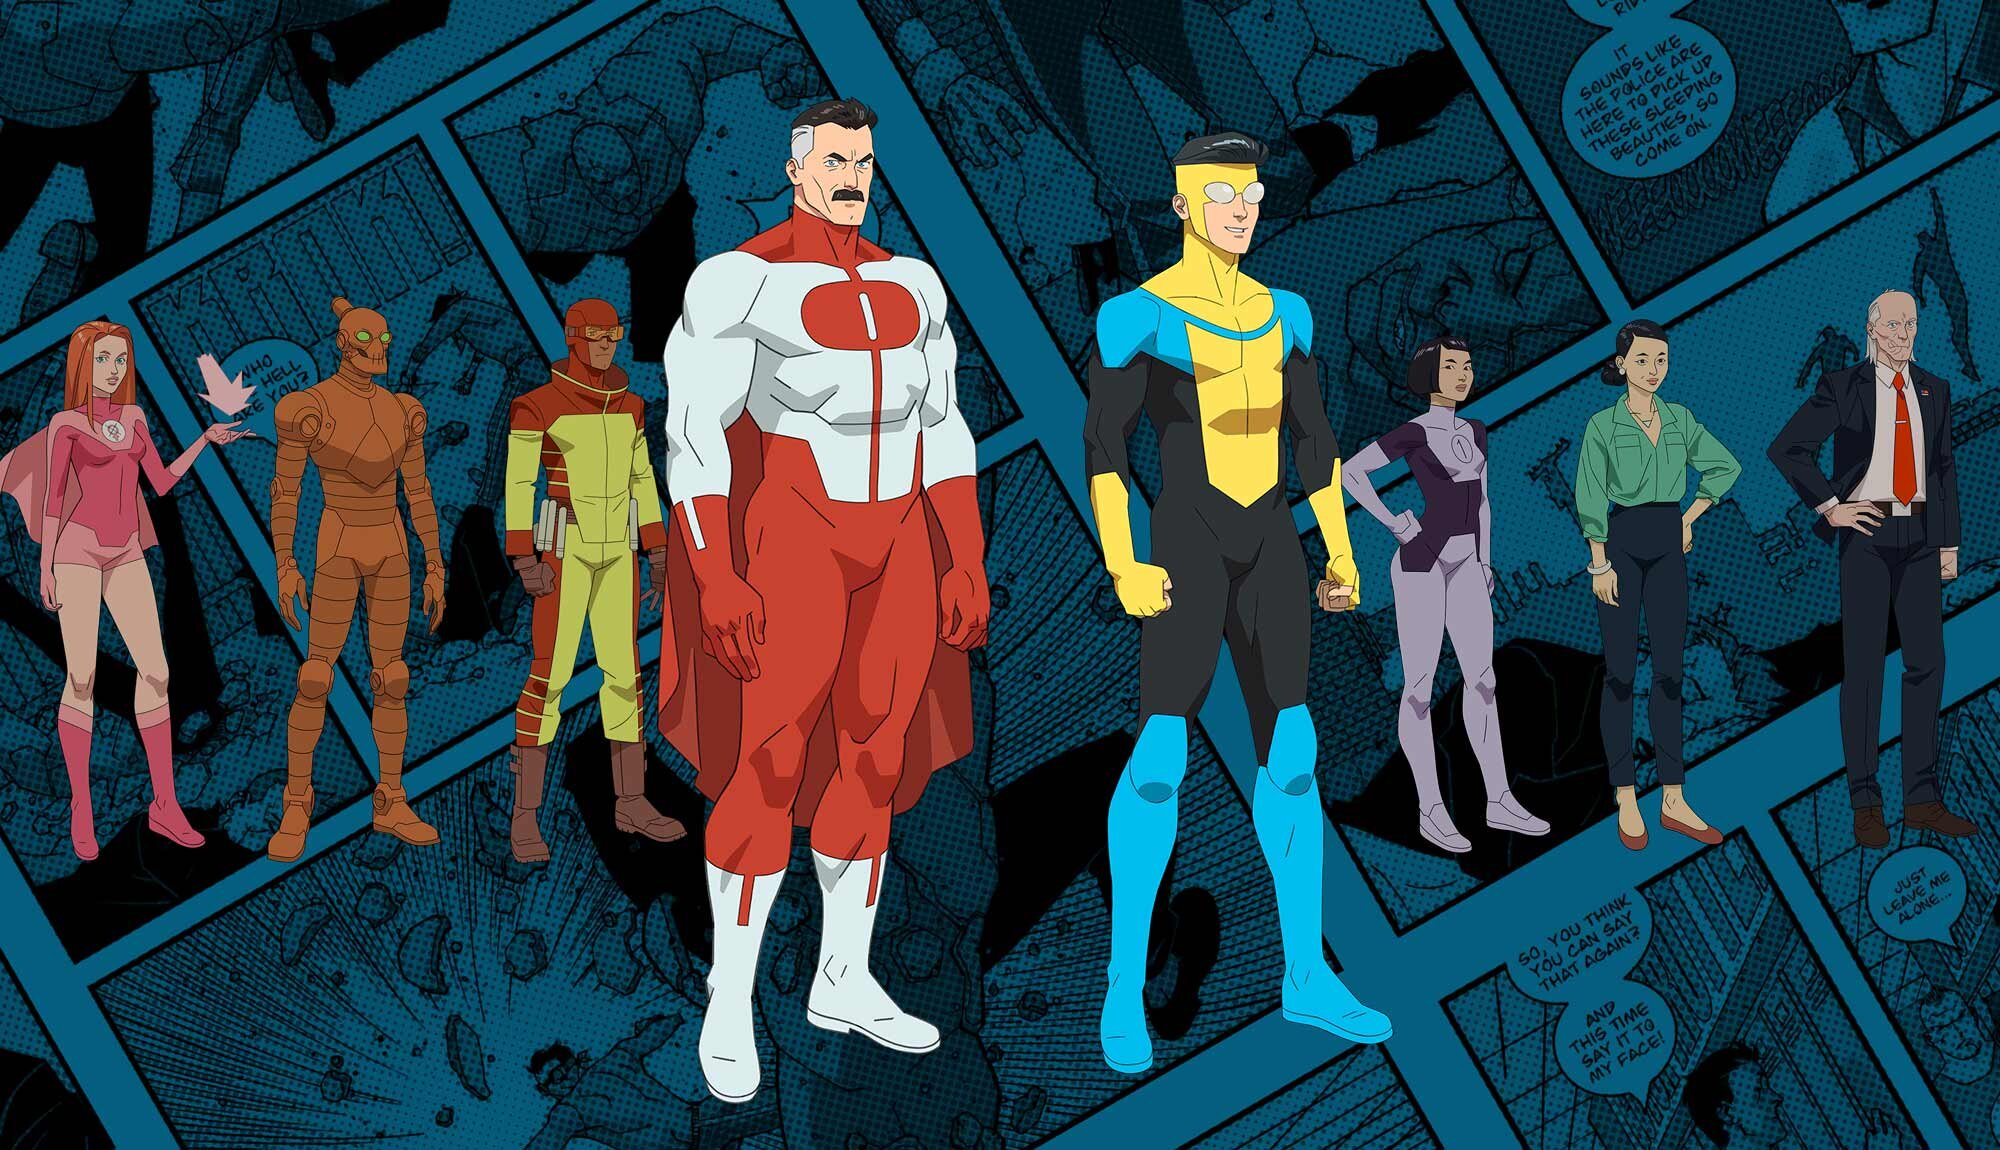 Caped-Joel Daly on X: Invincible Season 2 Episode 4  IN DEPTH REVIEW (MID  SEASON FINALE)  via @ LIKE THE BOOK? BUY IT  HERE -  #invincible #omniman #imagecomics #skybound  #atomeve #